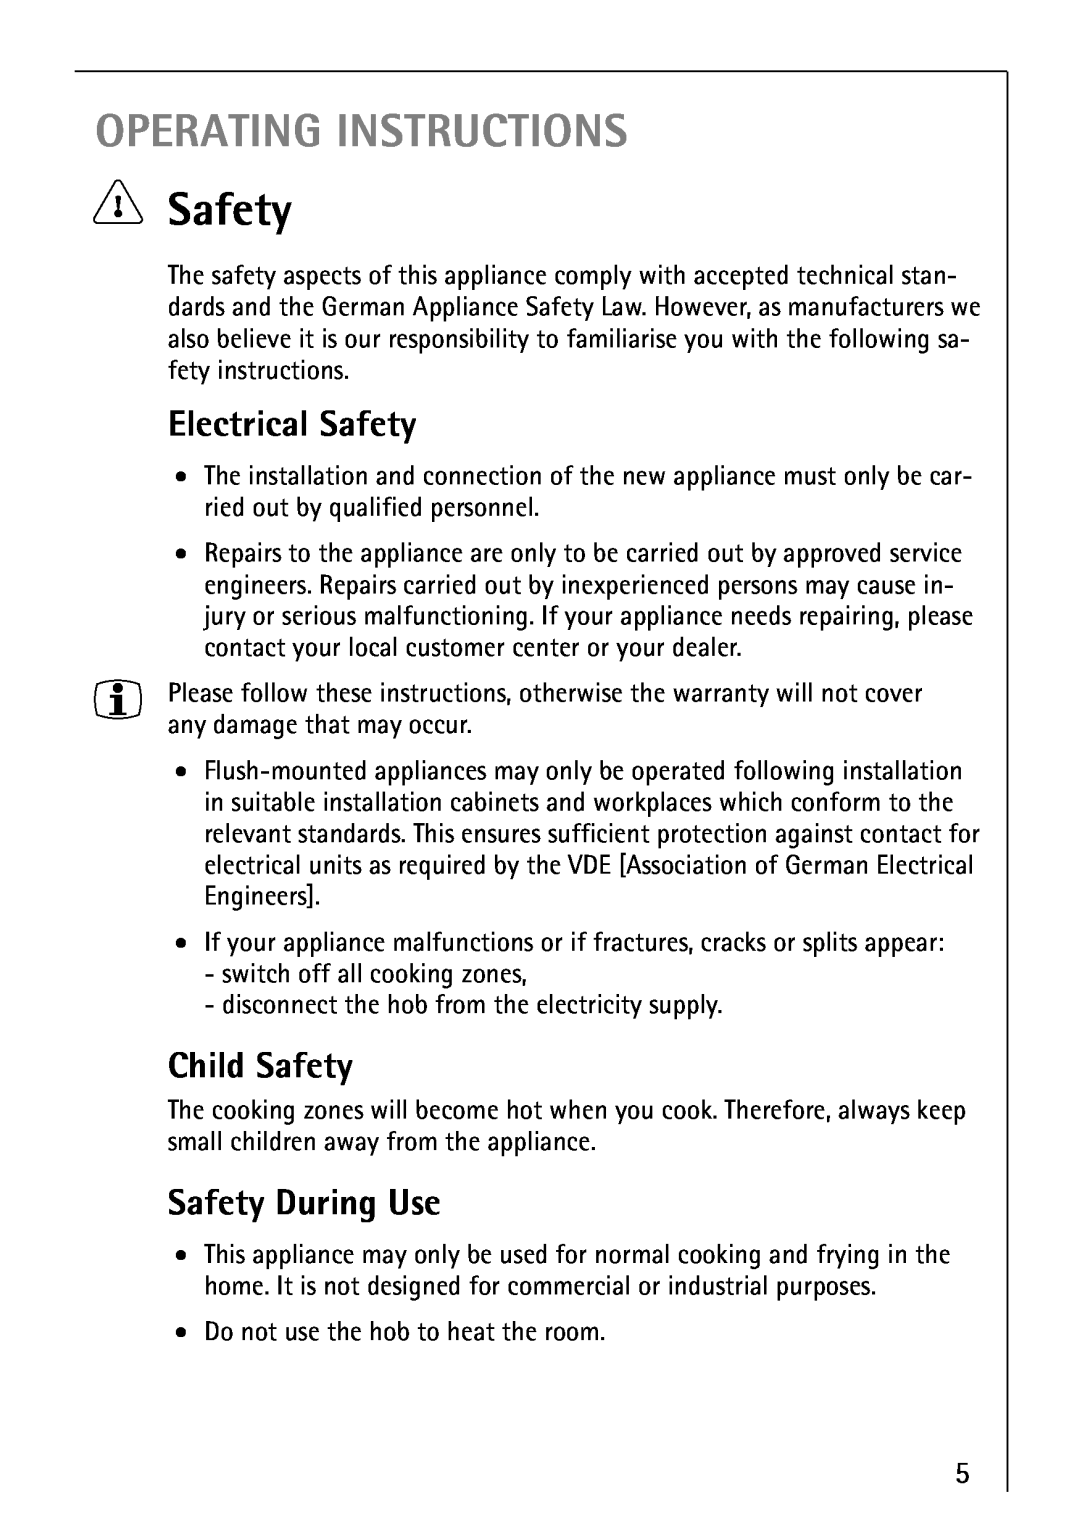 Electrolux 66300KF-an Operating Instructions, Electrical Safety, Child Safety, Safety During Use 